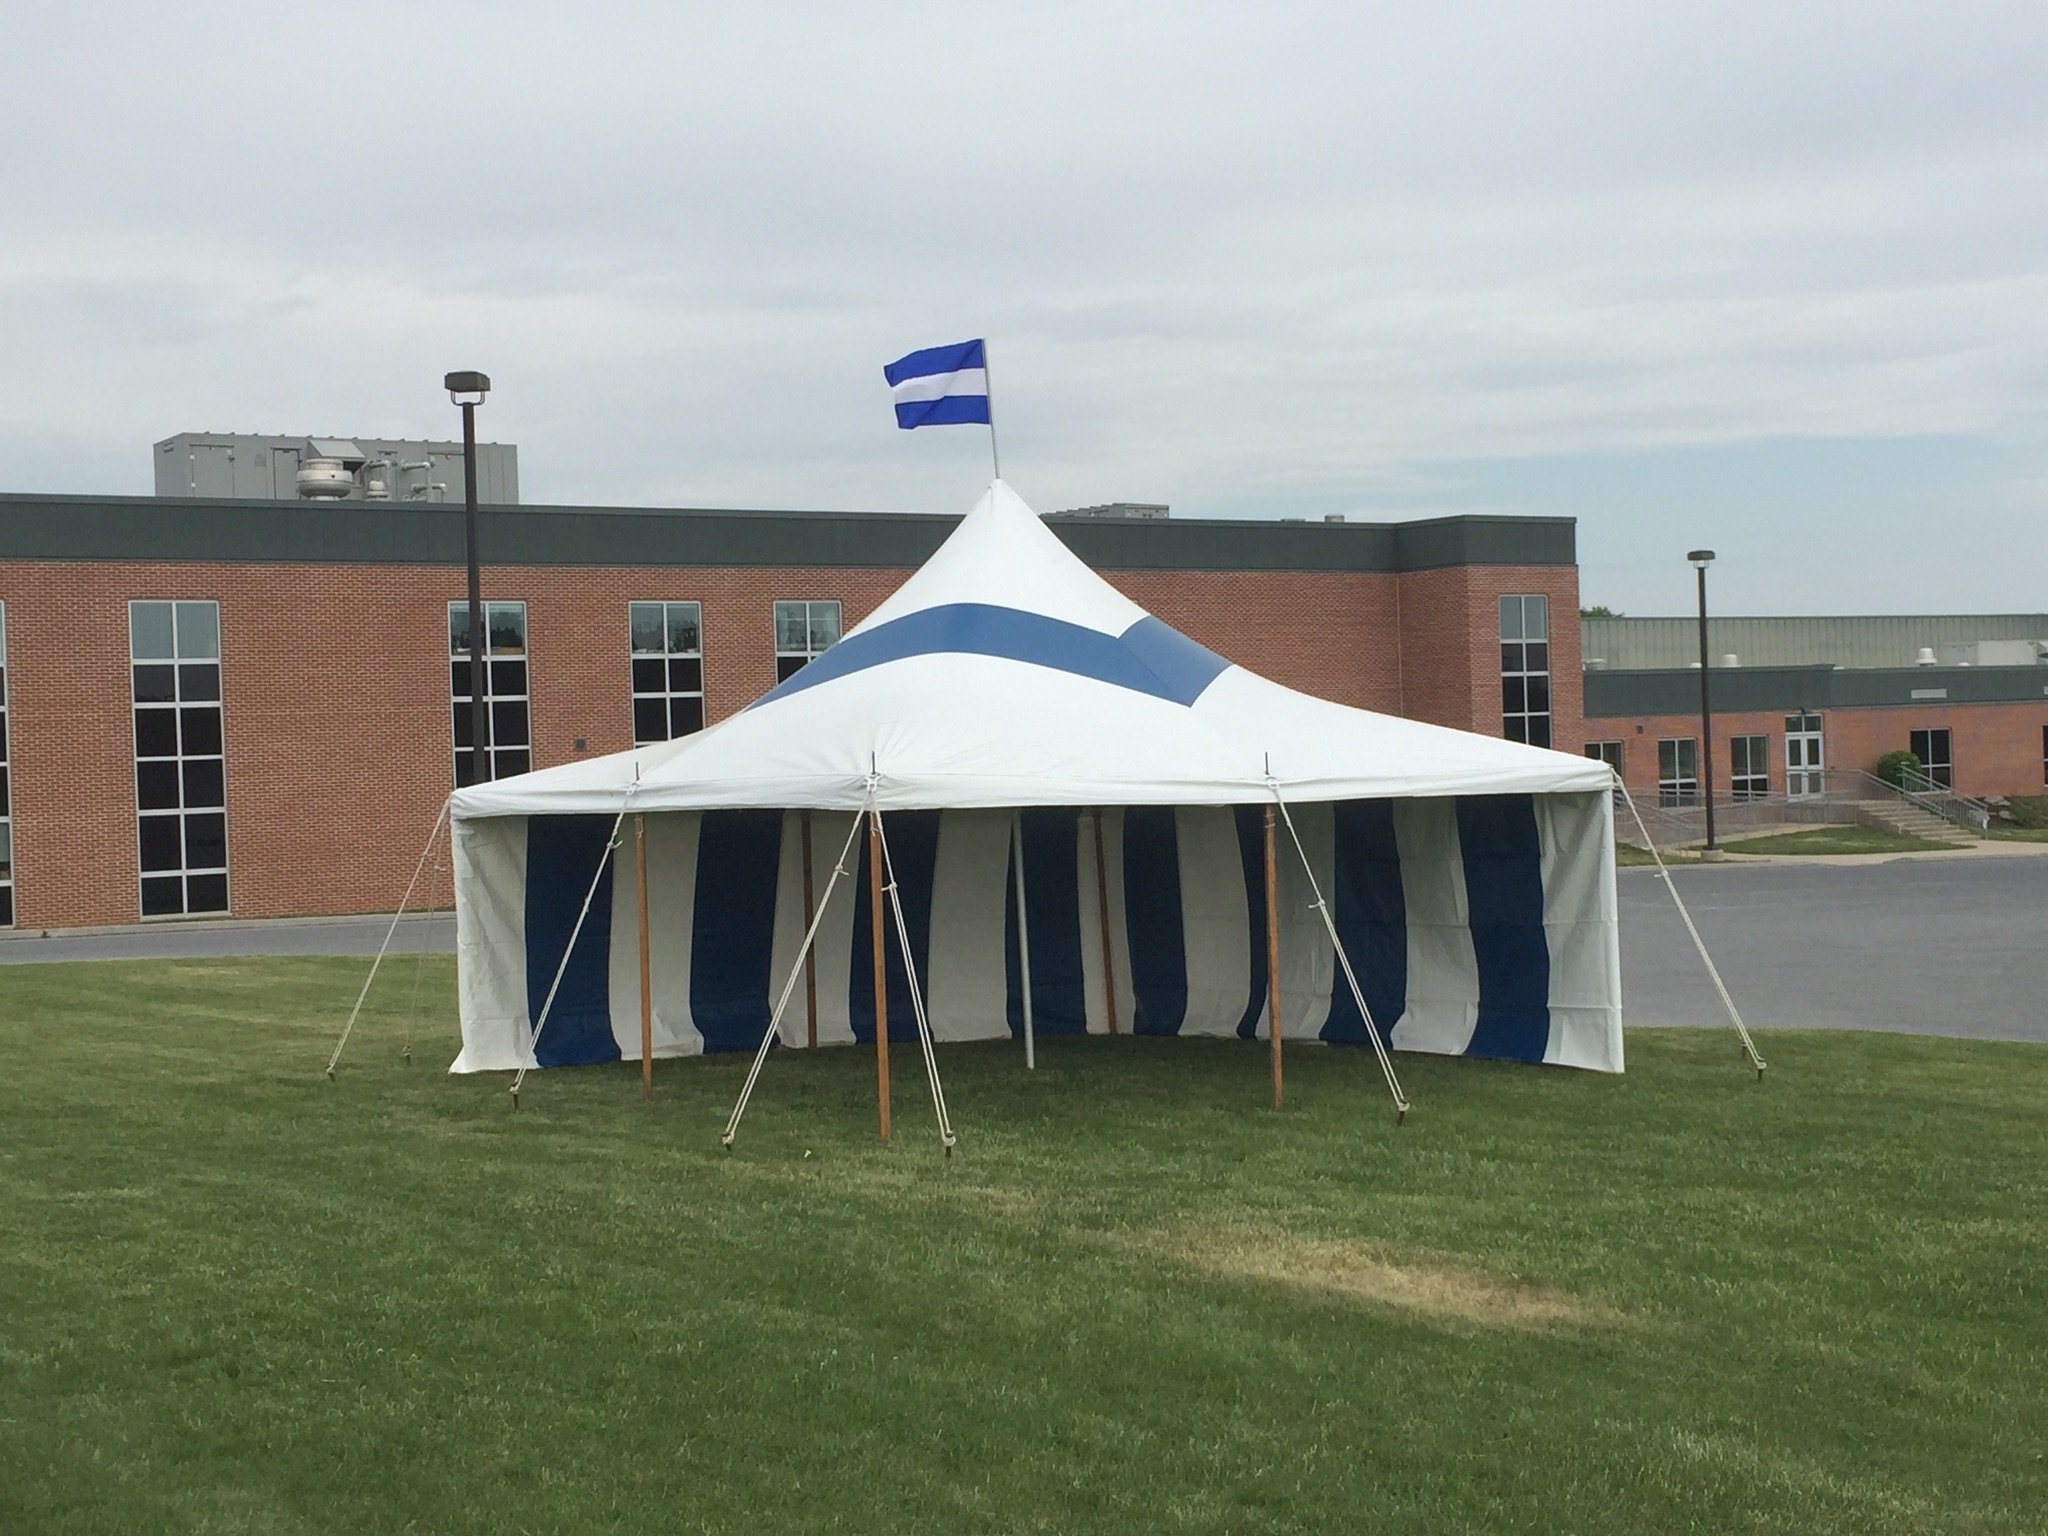 20x20 blue and white striped colored tent